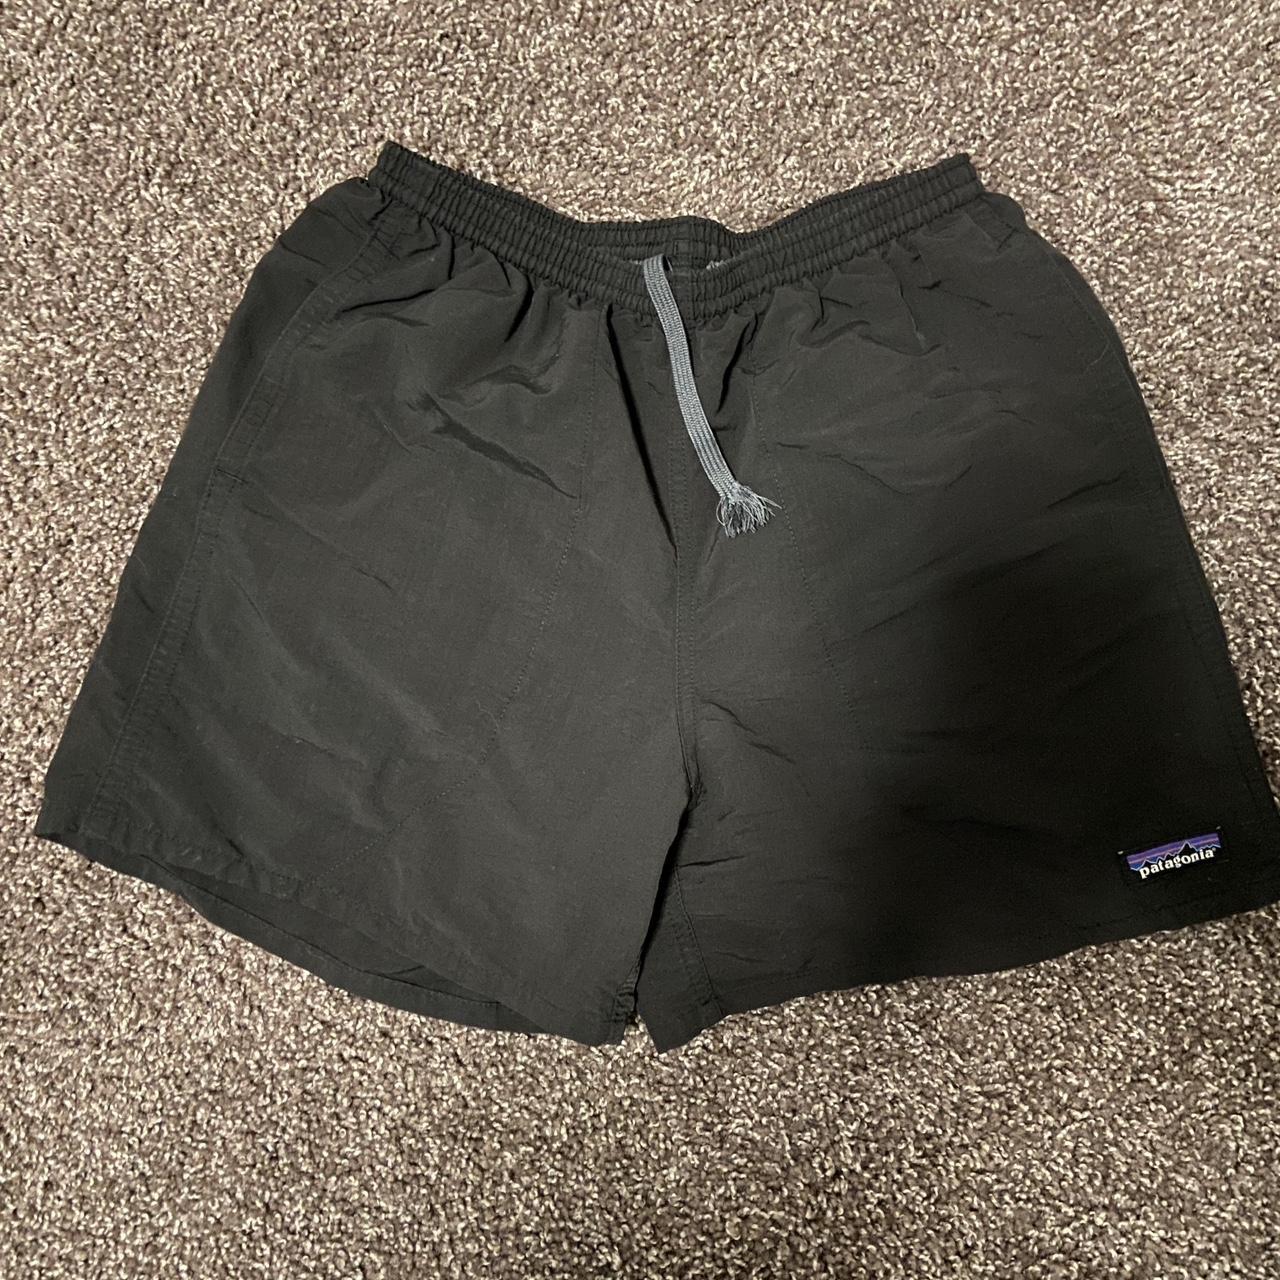 Patagonia 5 inch inseam shorts Cut out the netting... - Depop